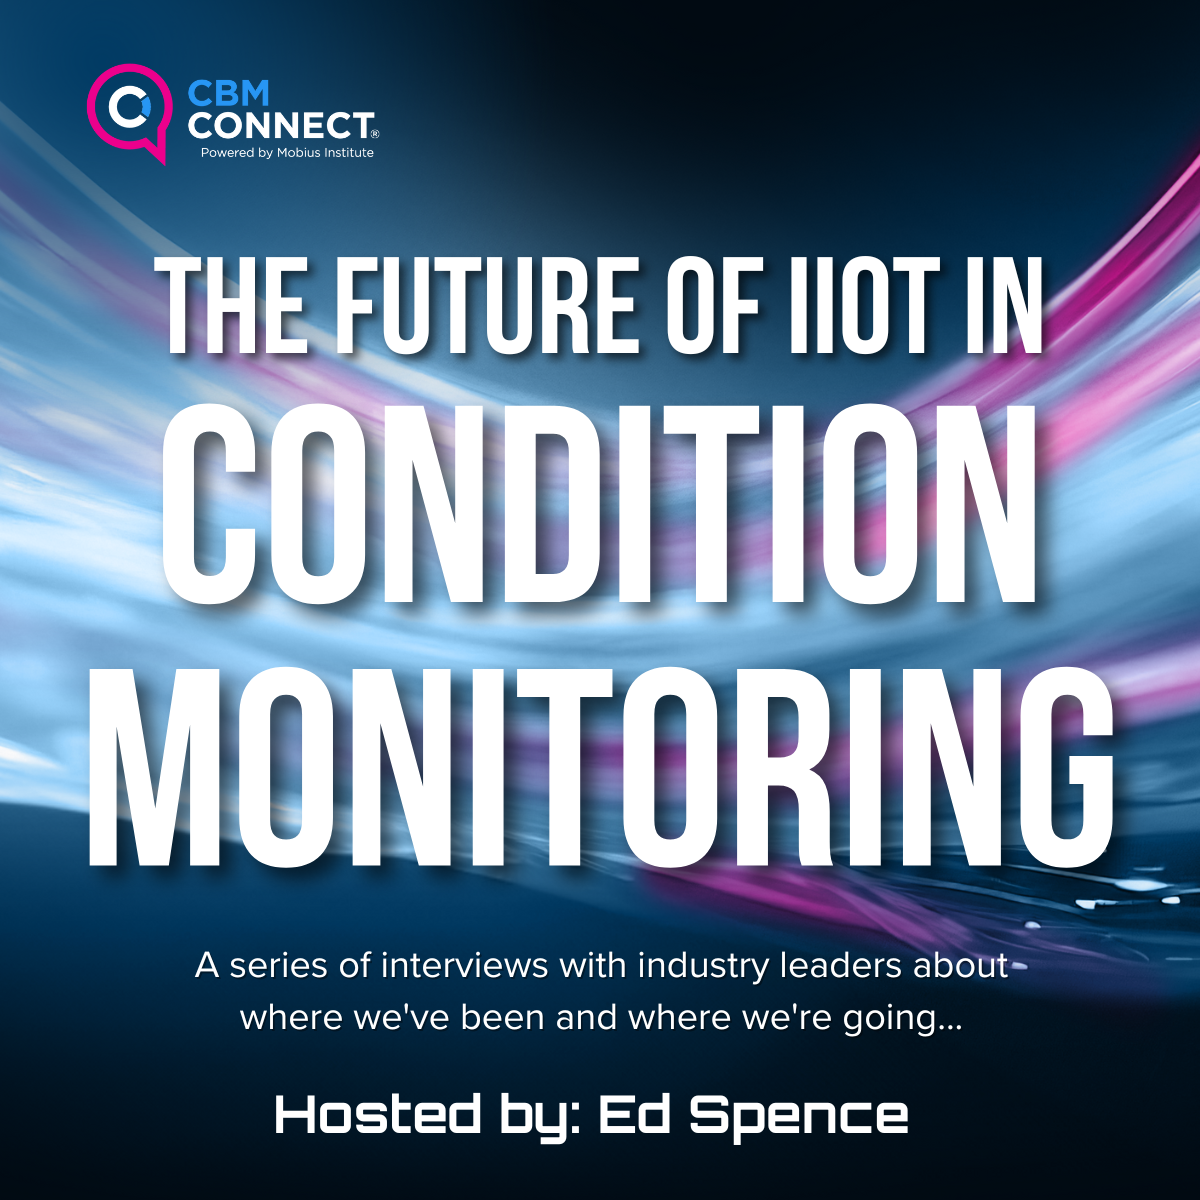 Intro The Future of IIoT in Condition Monitoring